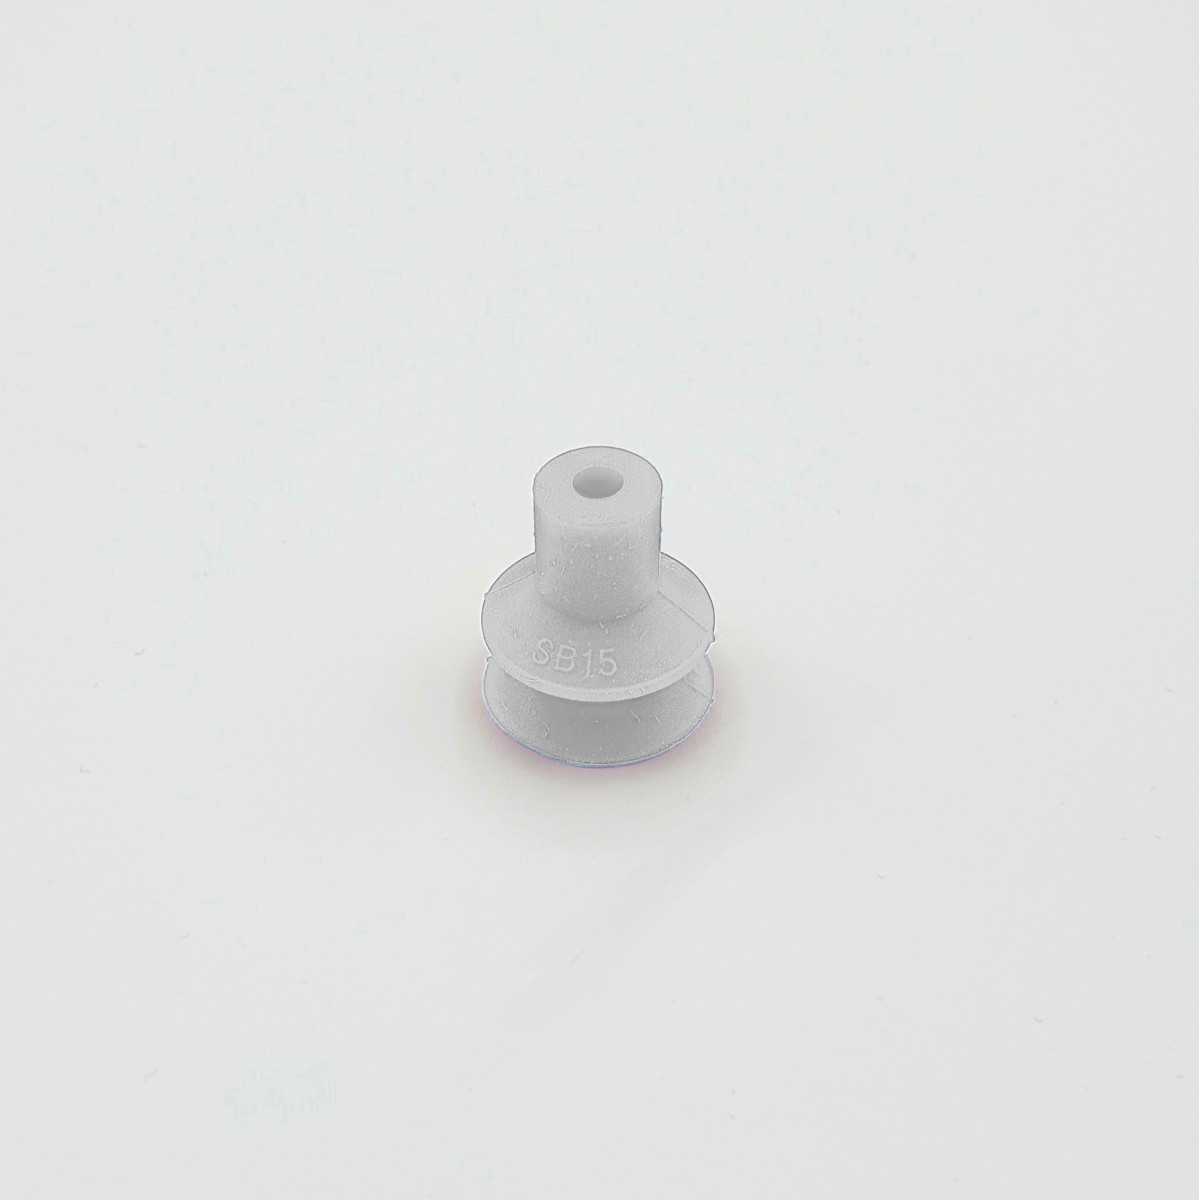 Bellows suction cup D6 / 1,5 / SI white / o.S. | Beta Online Shop